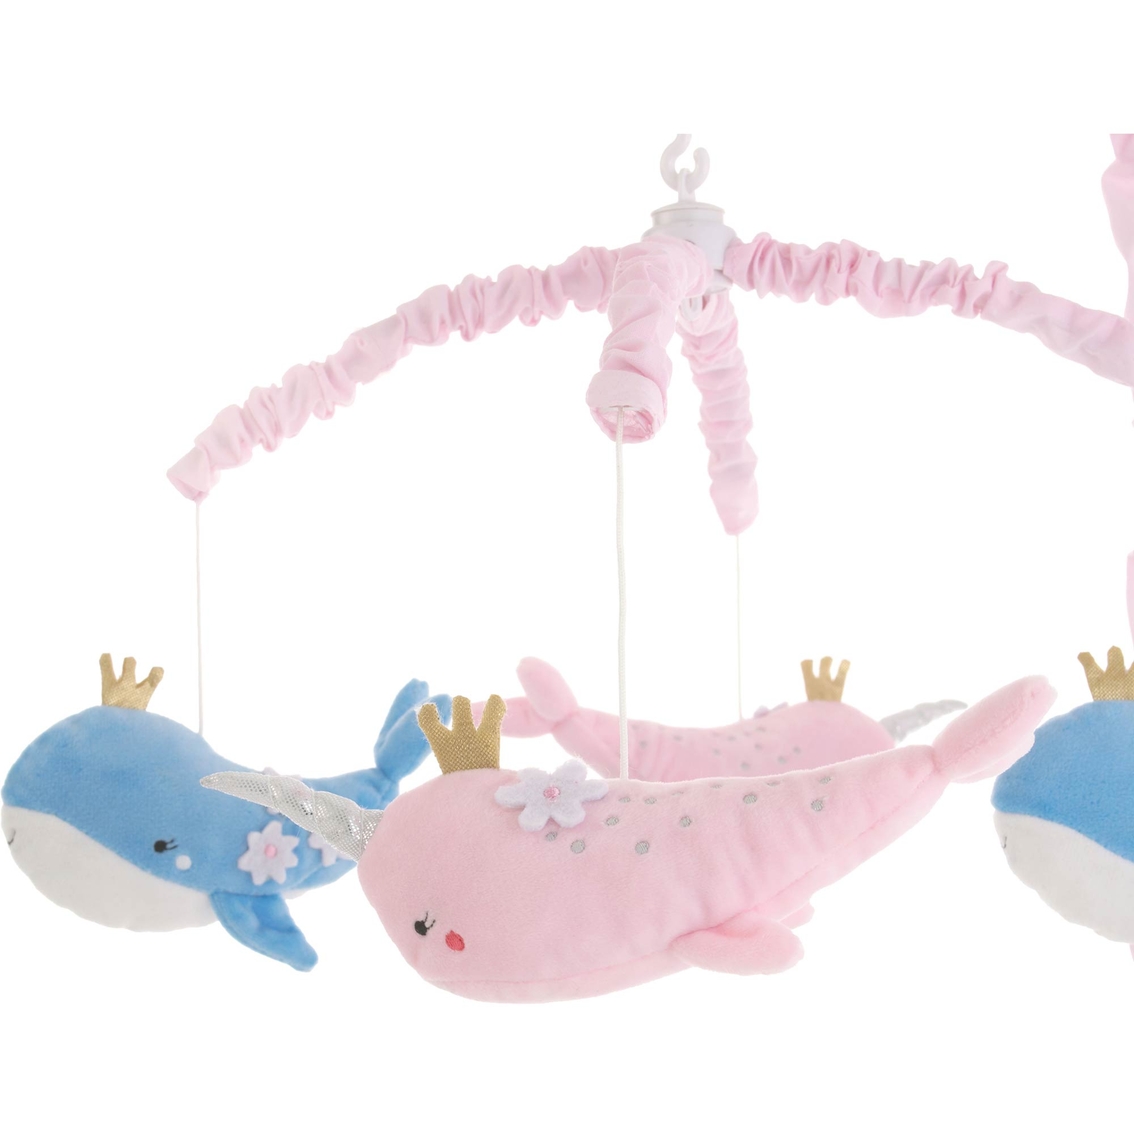 NoJo Under the Sea Whimsy Pink and Blue Whales and Narwhals Musical Mobile - Image 2 of 4